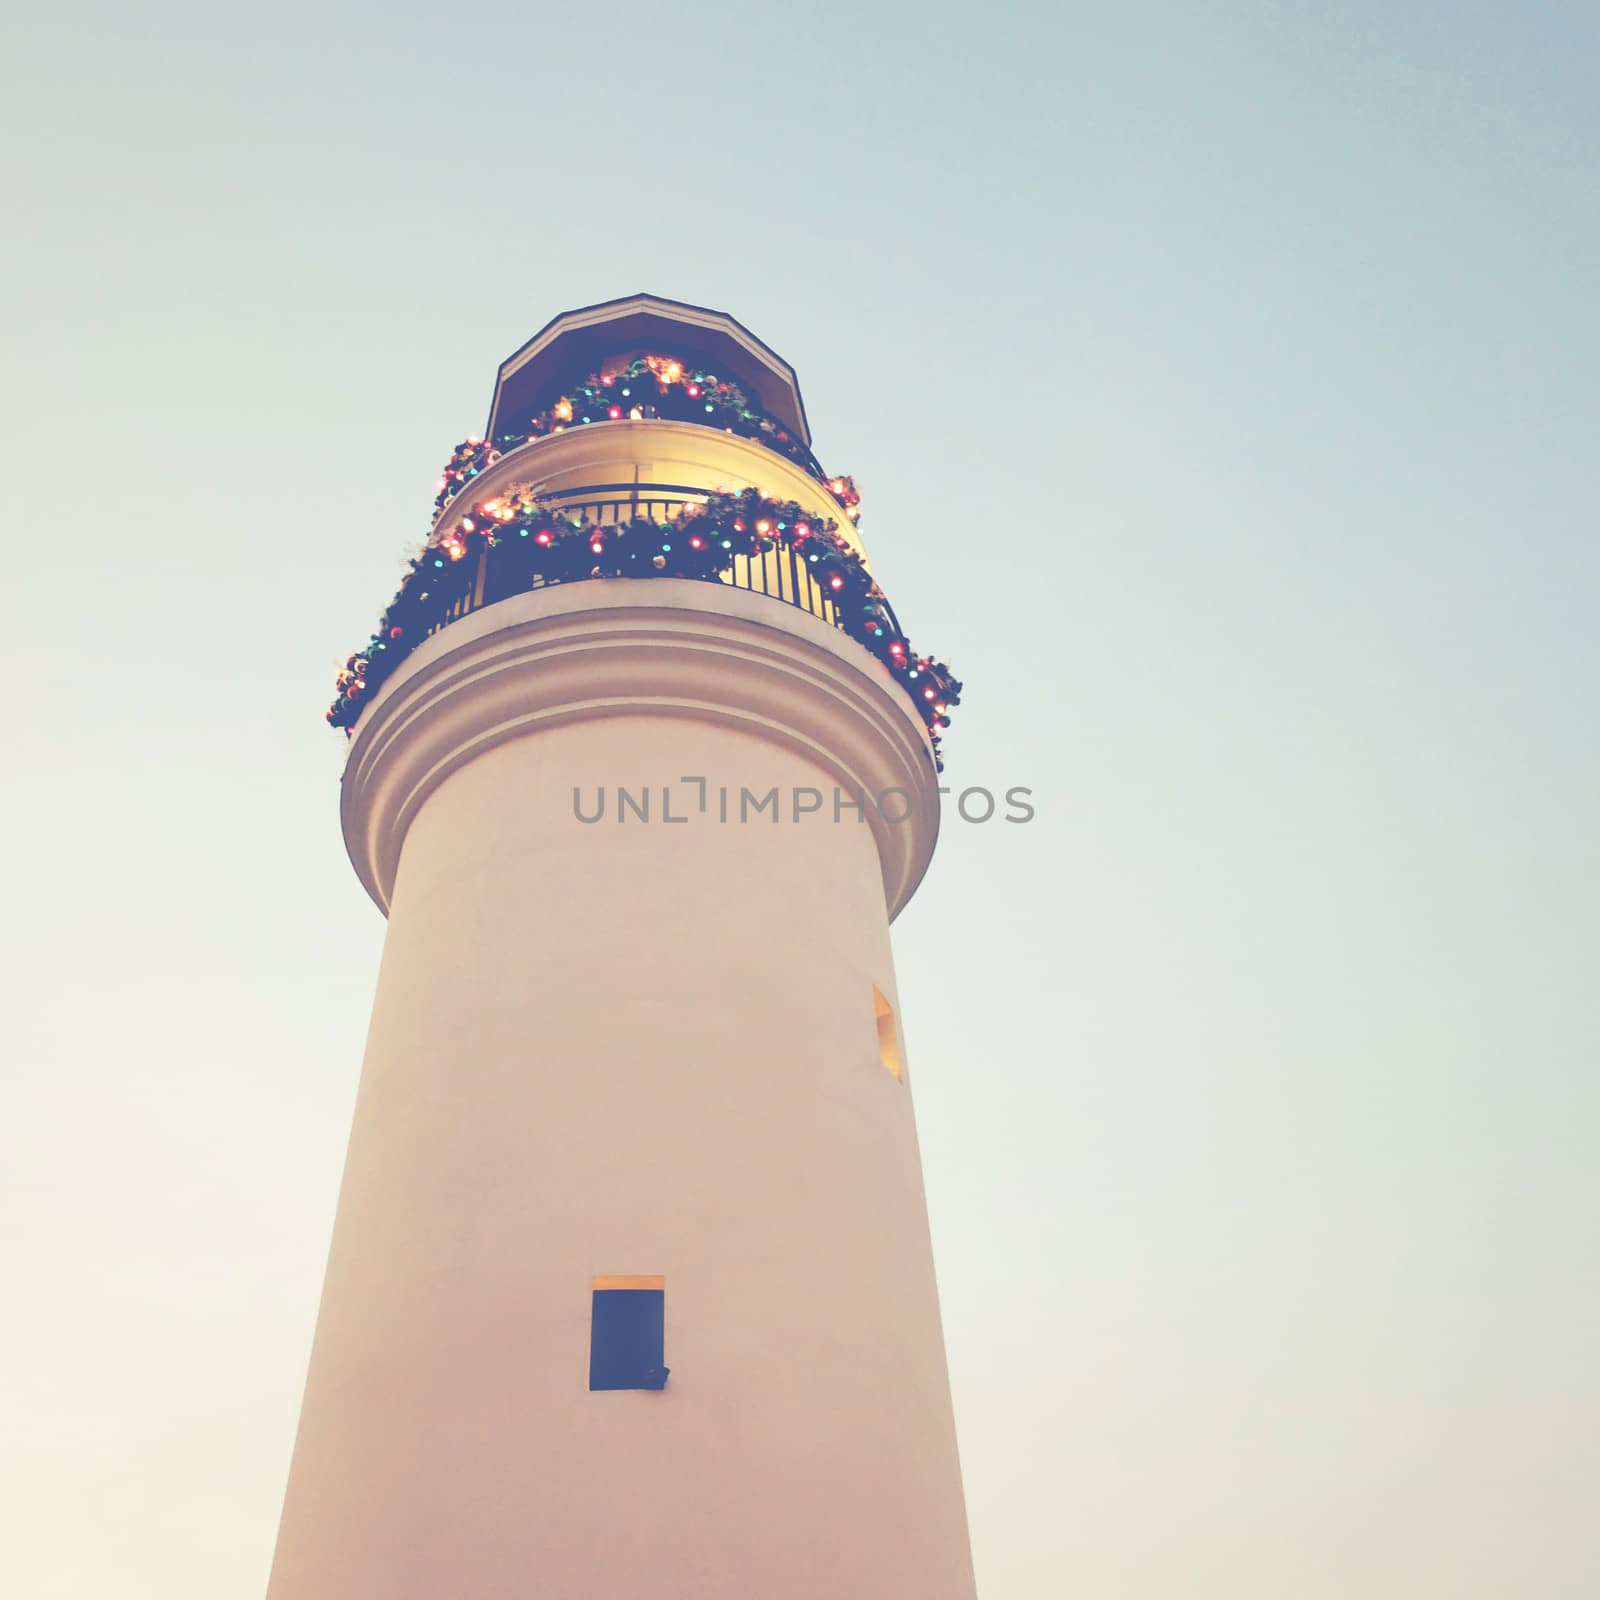 Lighthouse with christmas ornaments, retro filter effect  by nuchylee